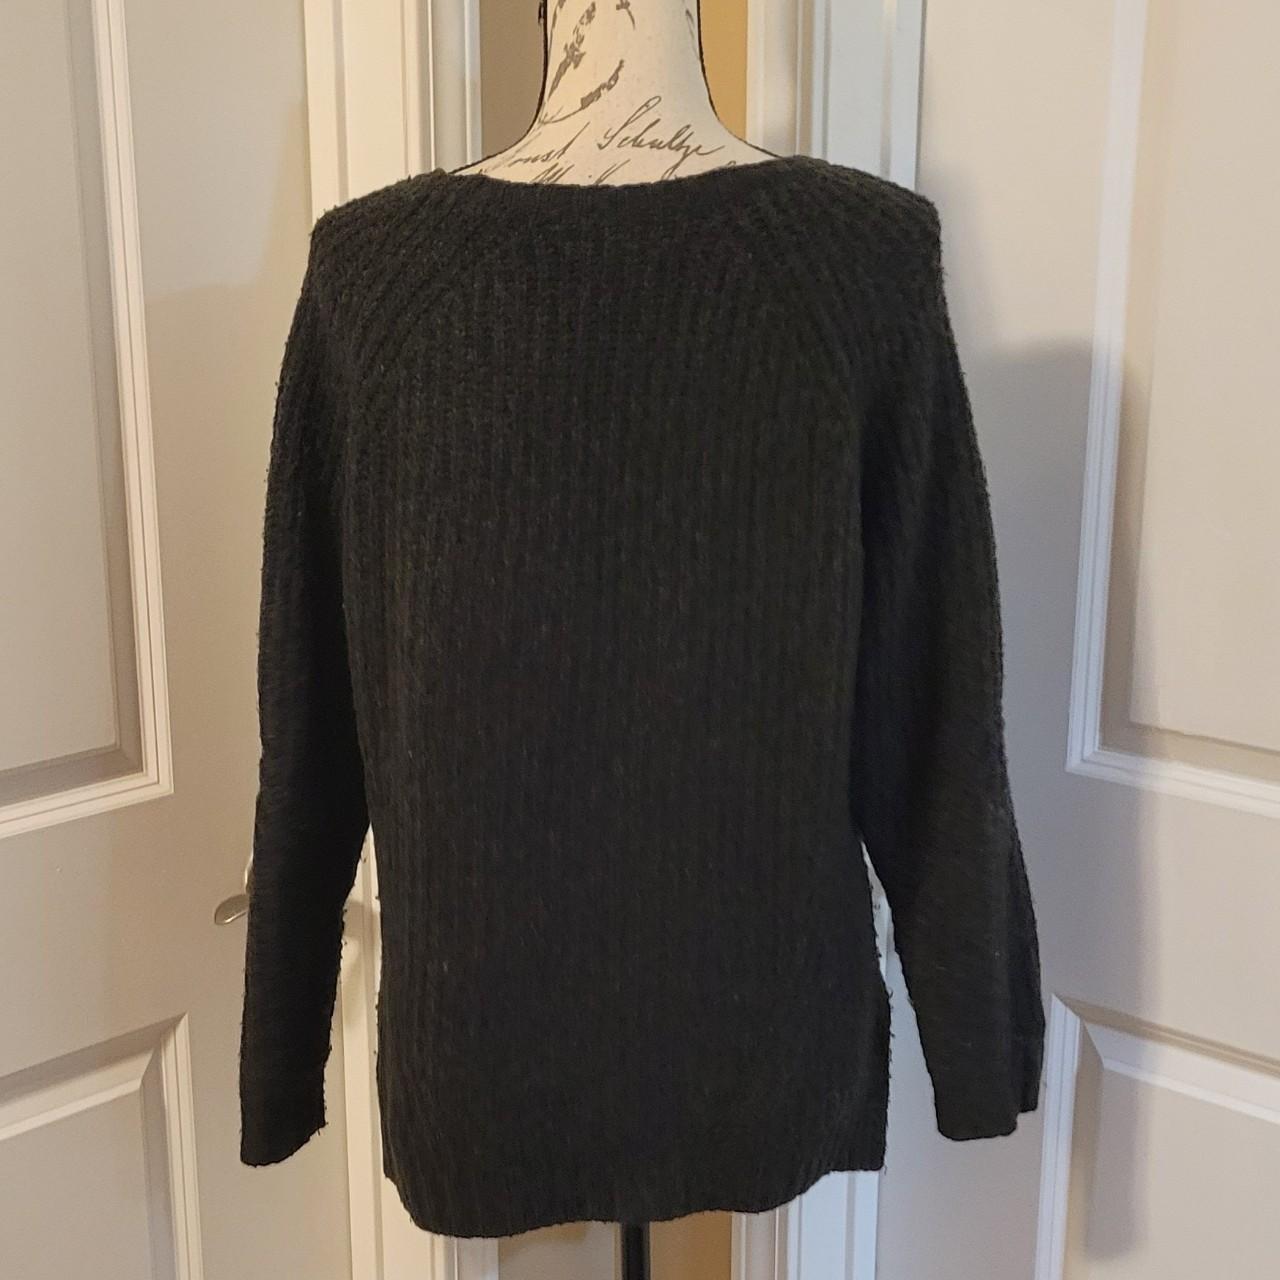 American Eagle Outfitters Women's Green and Black Jumper | Depop